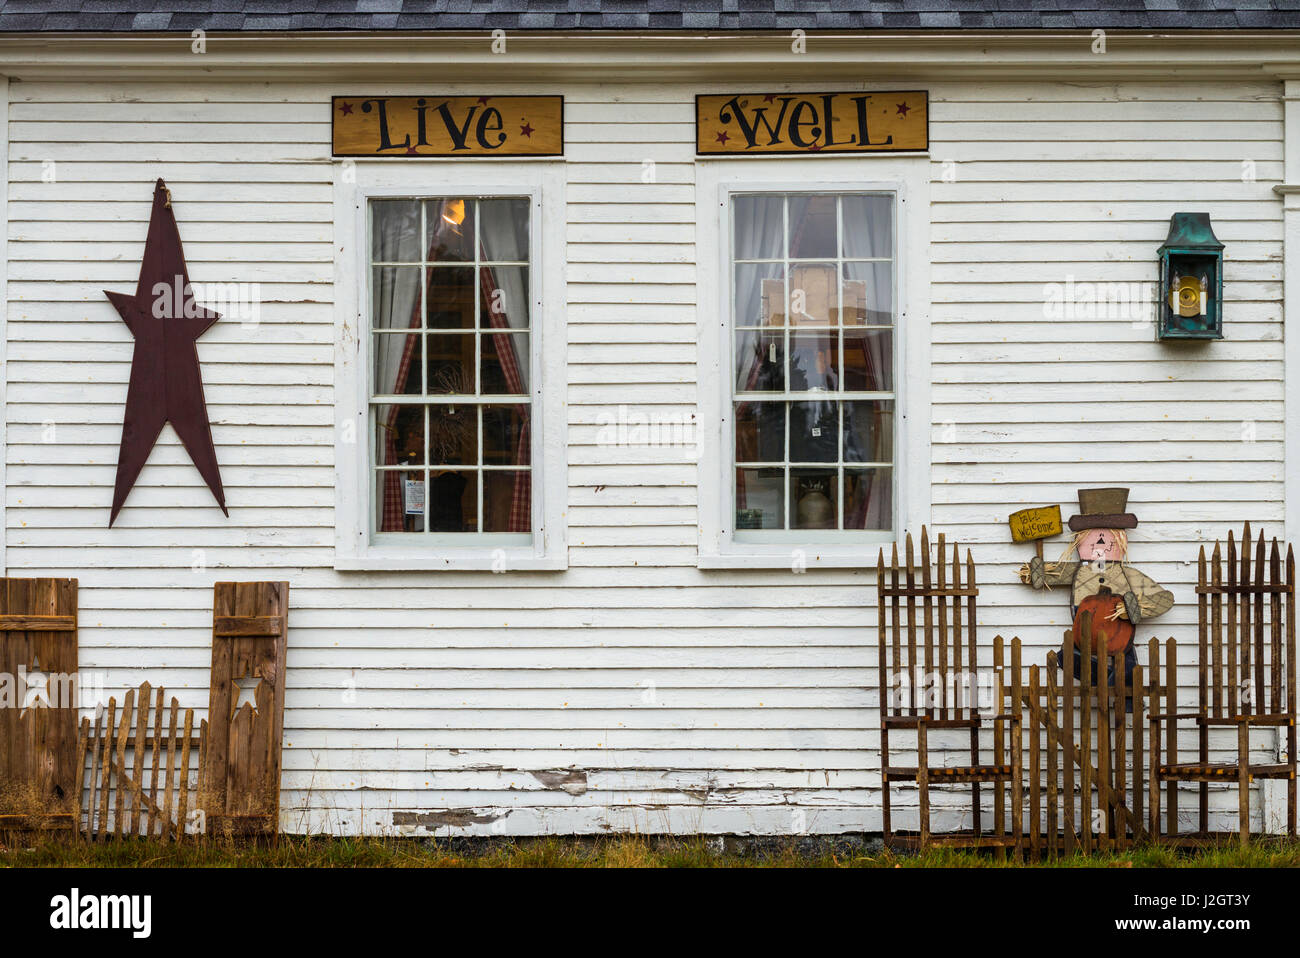 USA, New Hampshire, Lake Winnipesaukee, Moultonborough, antique shop with signs, live-well Stock Photo